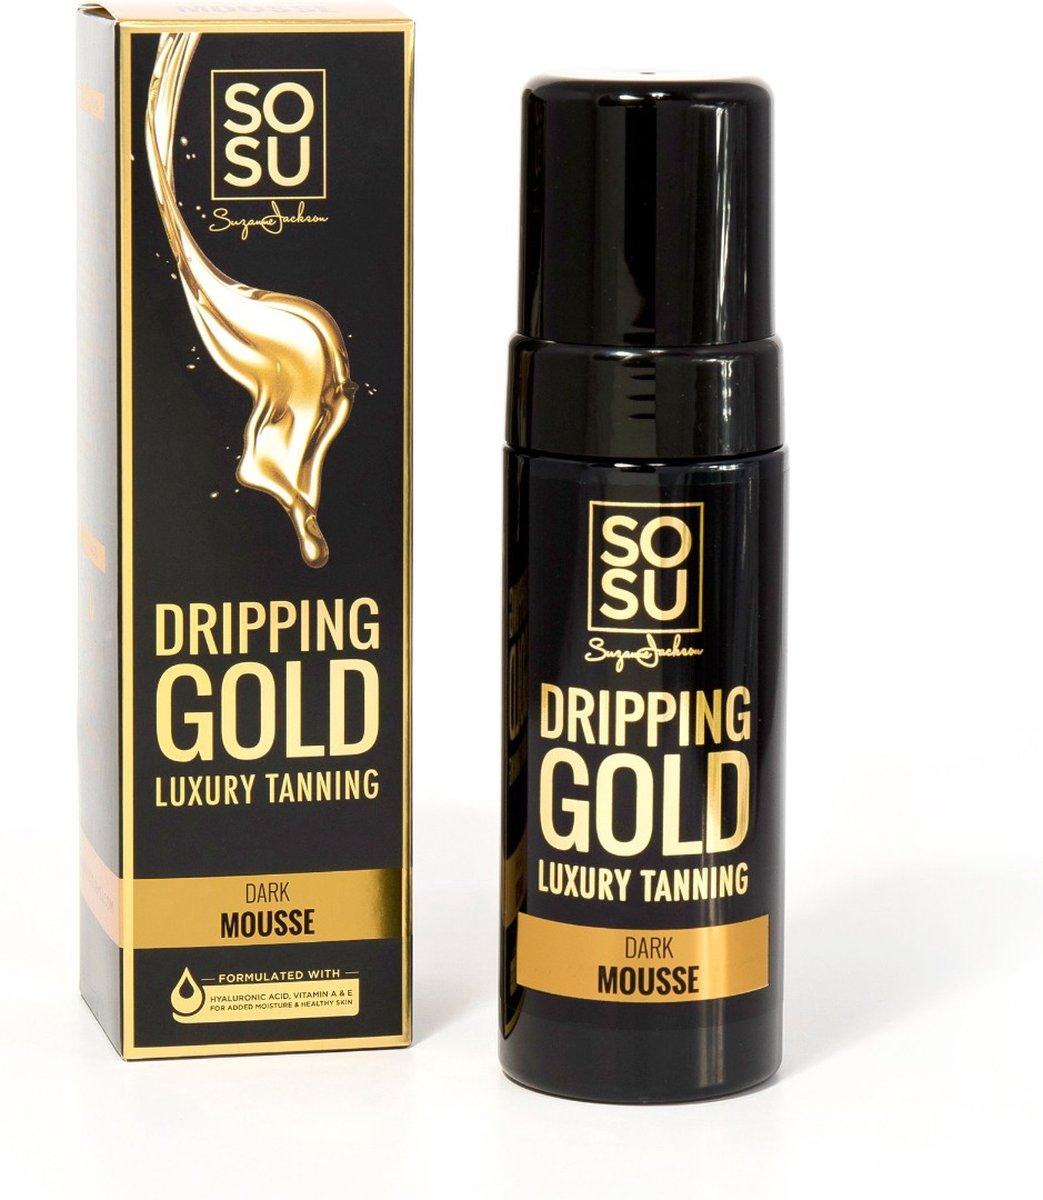 Sosu by SJ - Dripping Gold Luxury Tanning Mousse - Medium - Zelfbruiner mousse